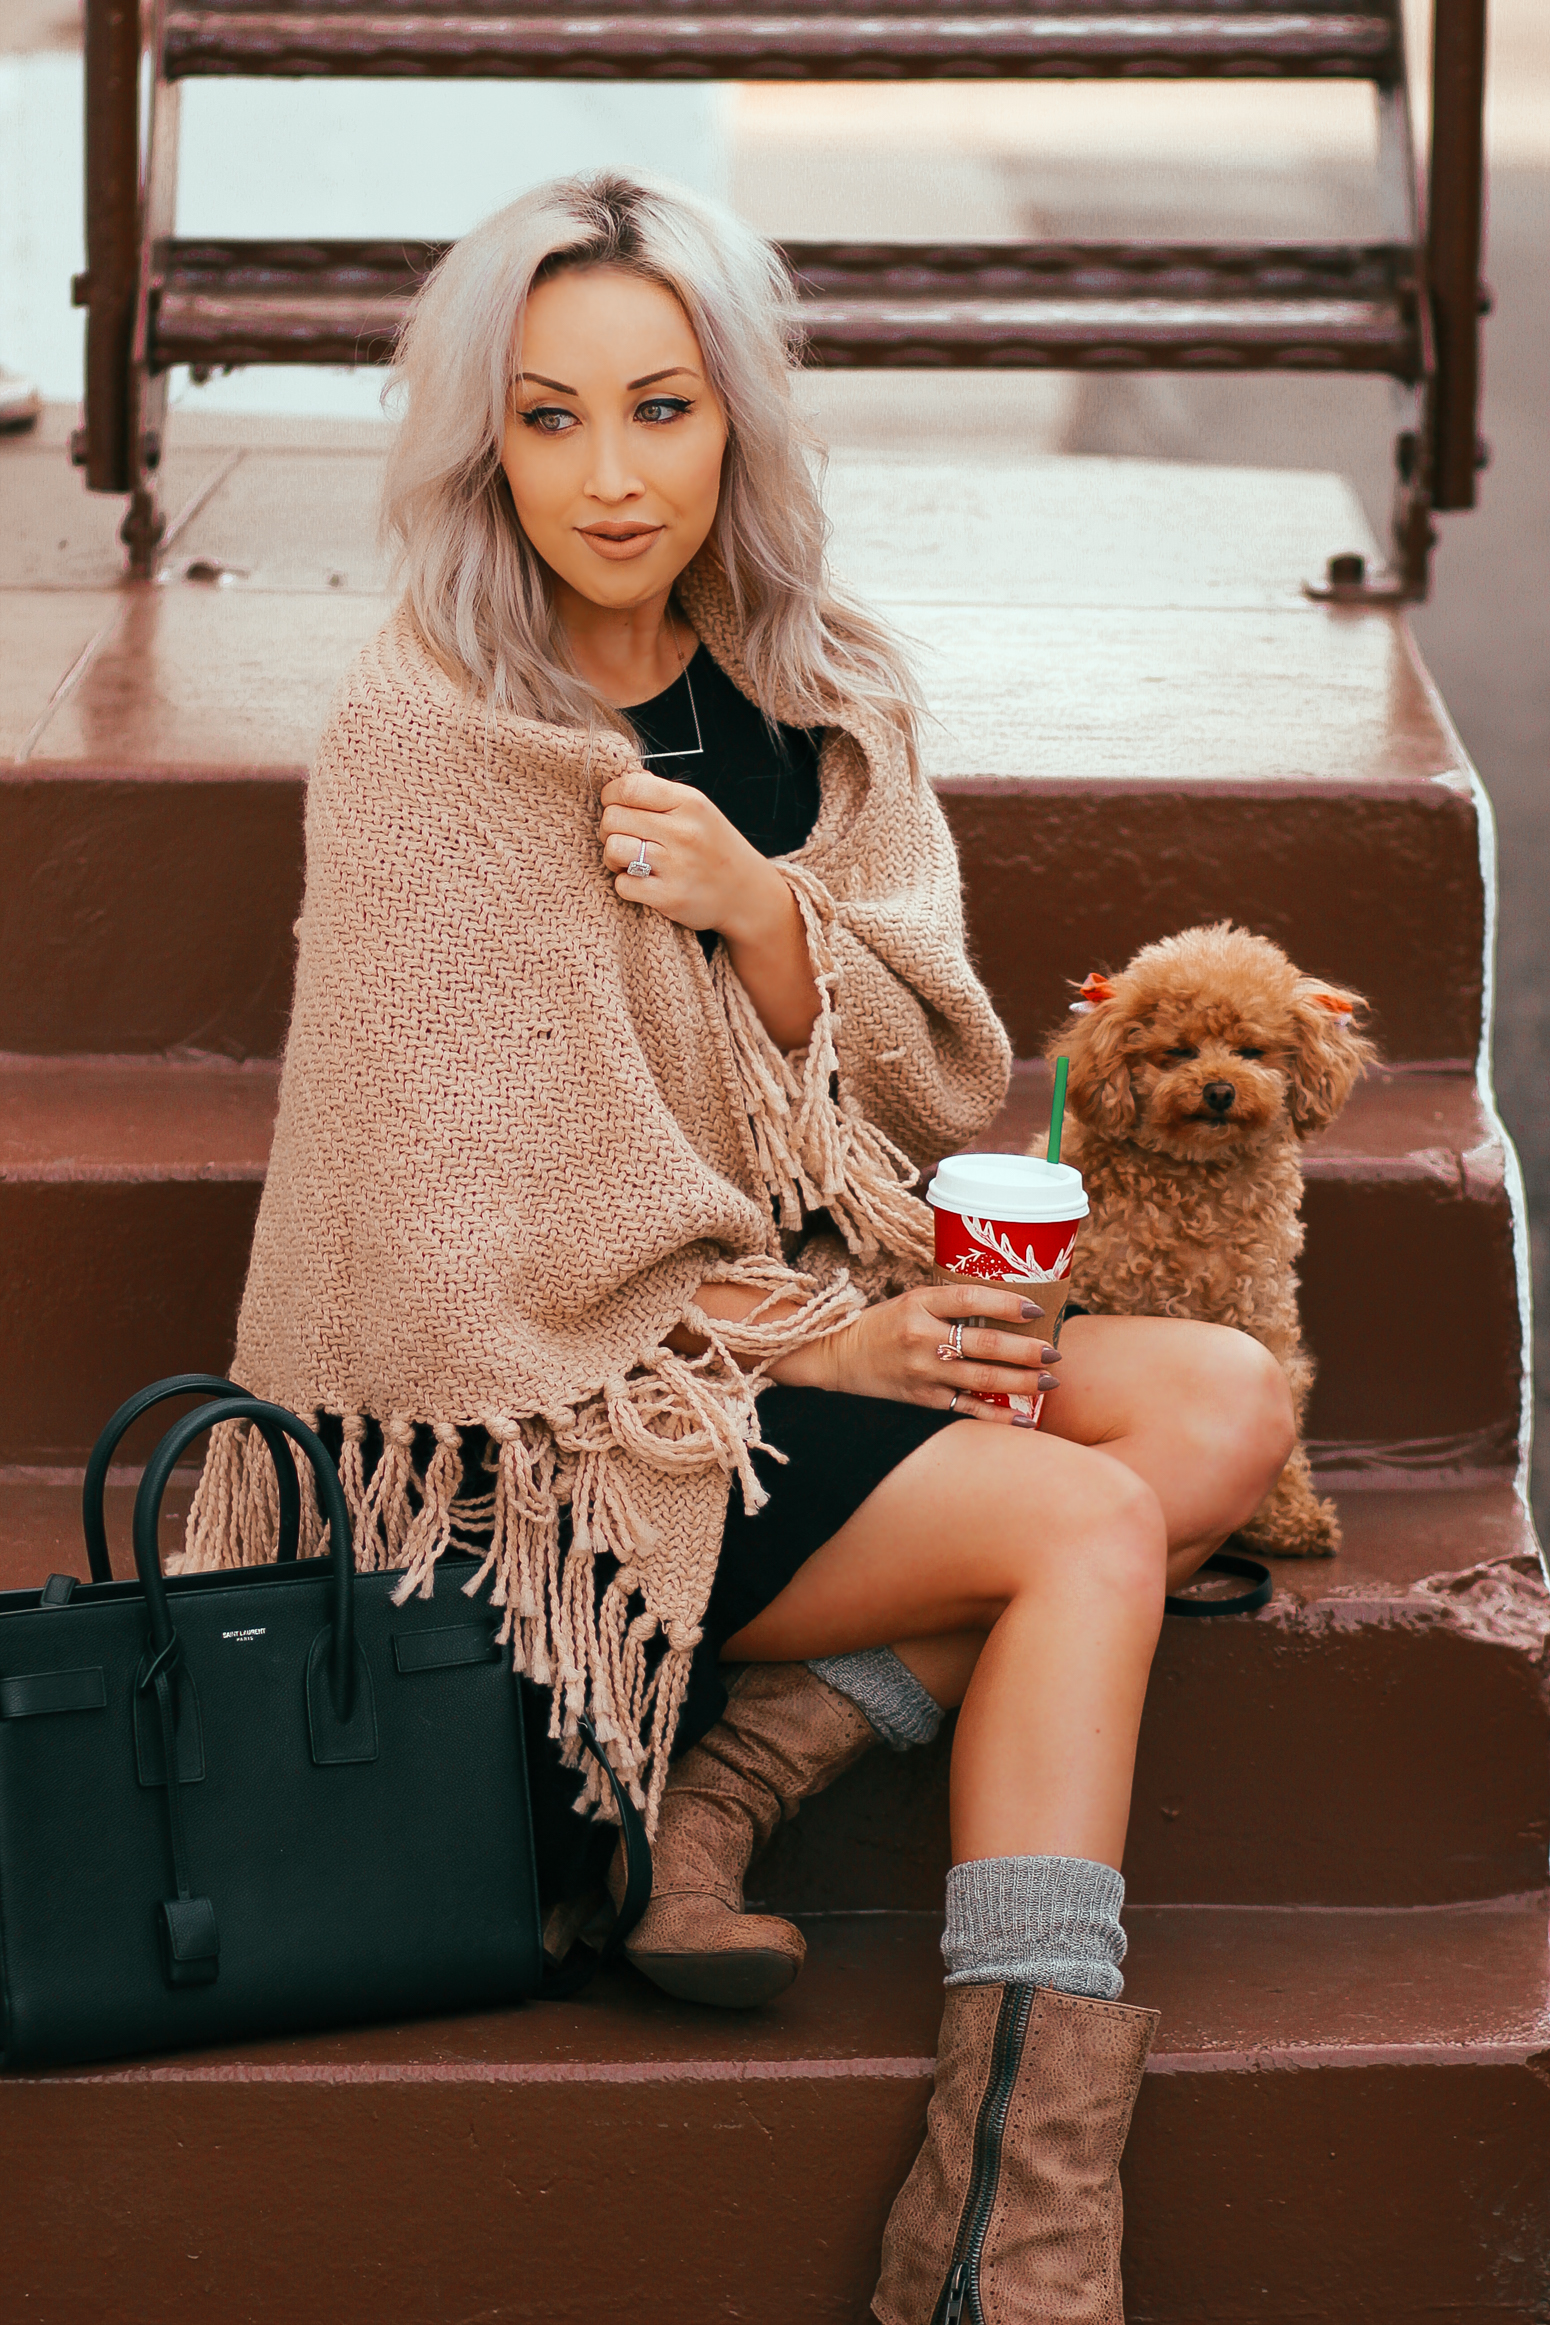 Blondie in the City | Comfy Fall Outfit | Beige Nordstrom Shawl